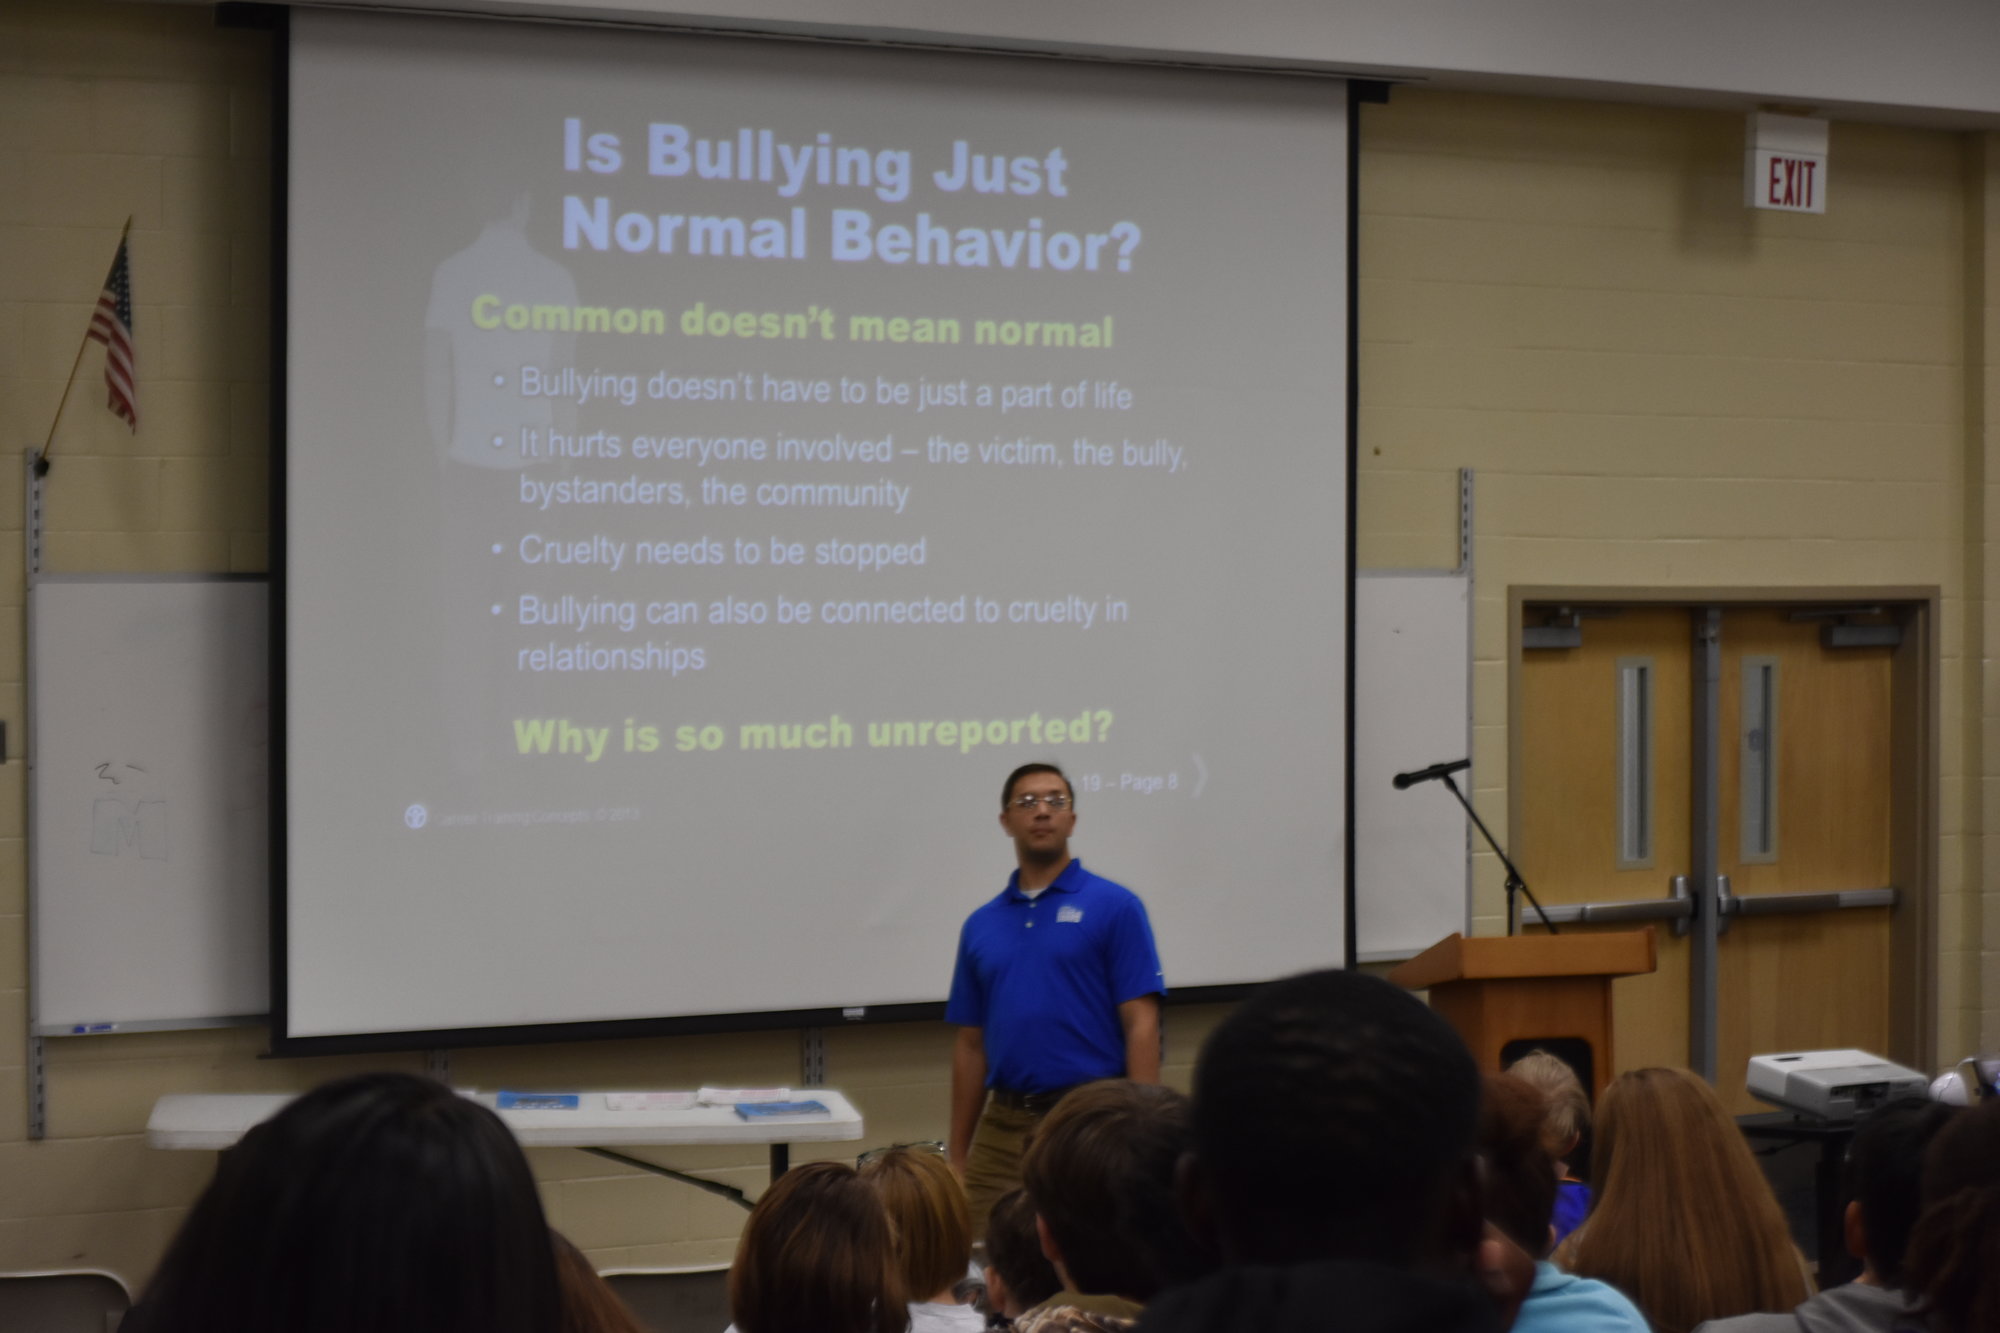 at http://www.theitem.com/stories/manning-high-holds-anti-bullying-presentations,317295